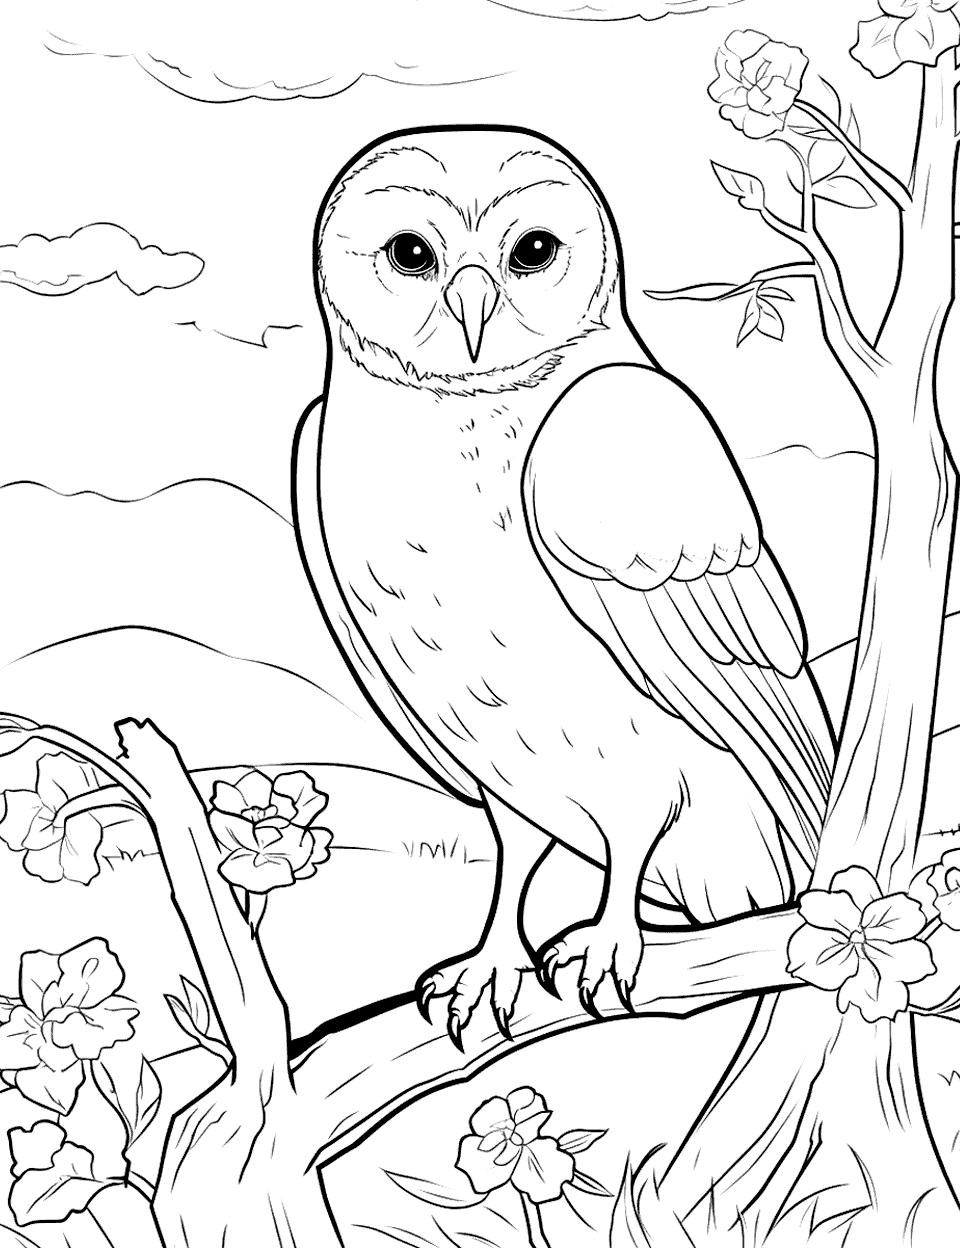 Barn Owl in a Tree Farm Coloring Page - An owl perched in a tree near the barn.